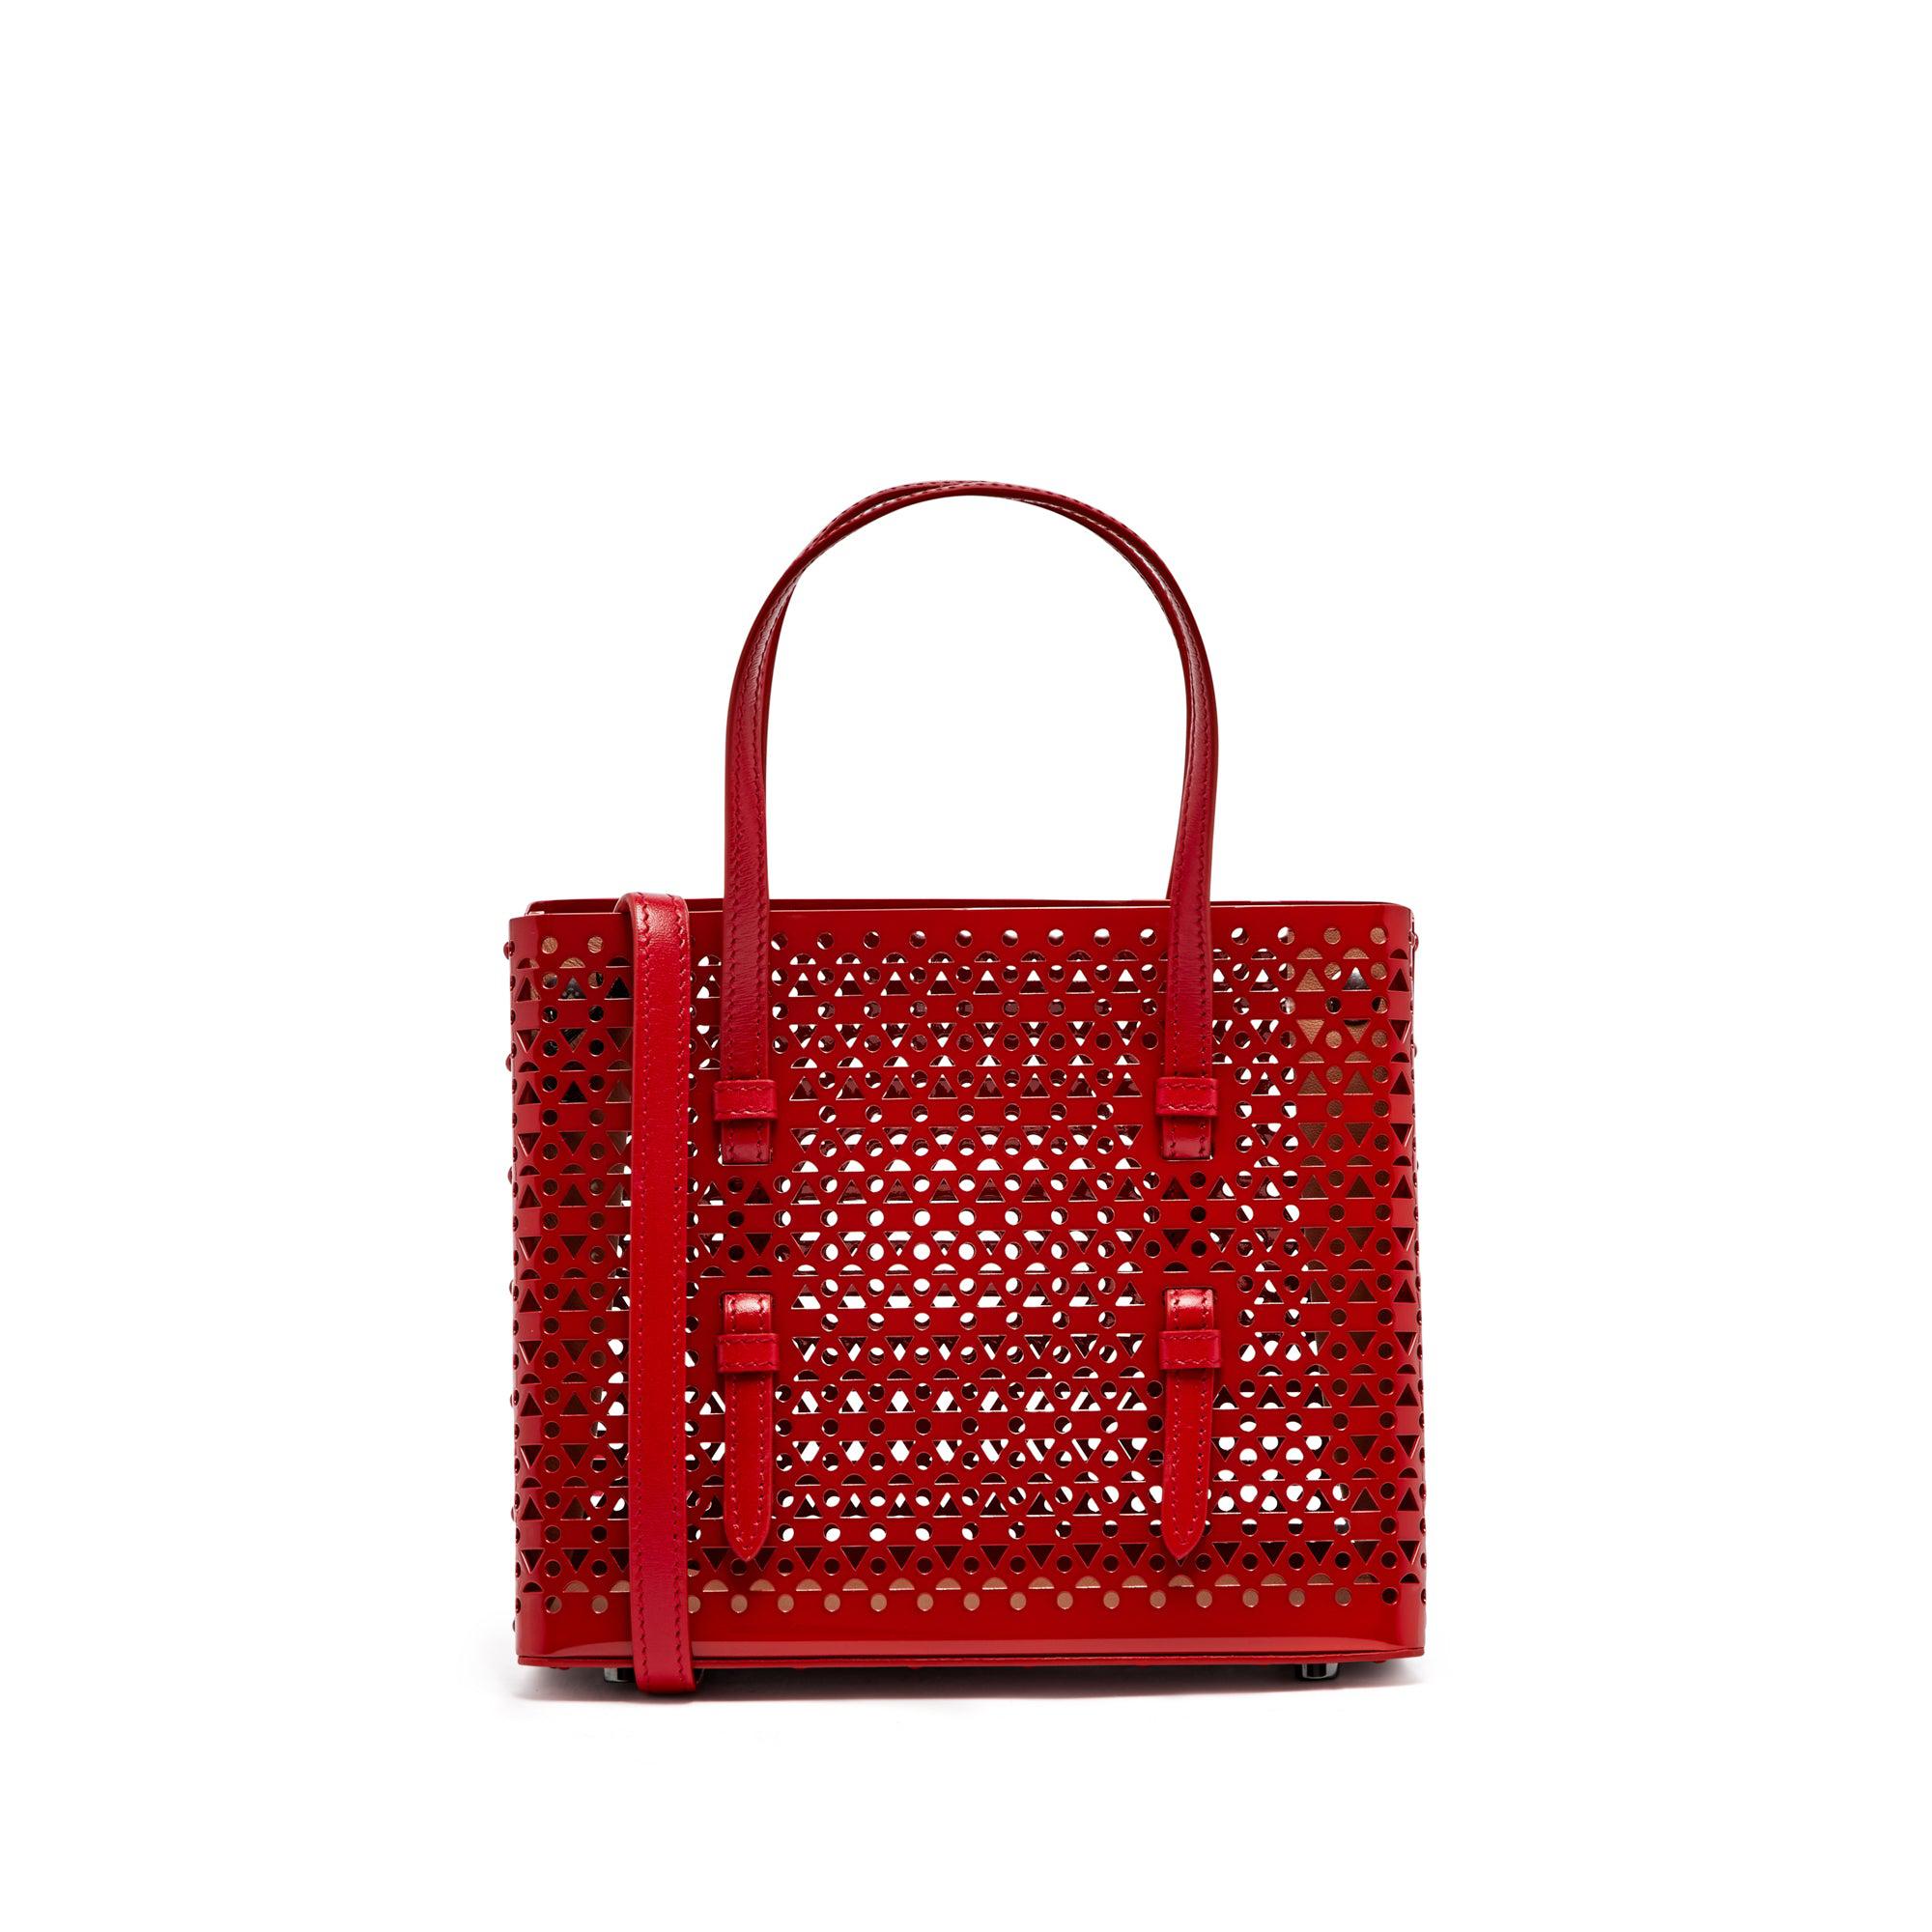 ALAïA Women's Mina 20 Small Tote Bag (Lacquer Red) by ALAIA